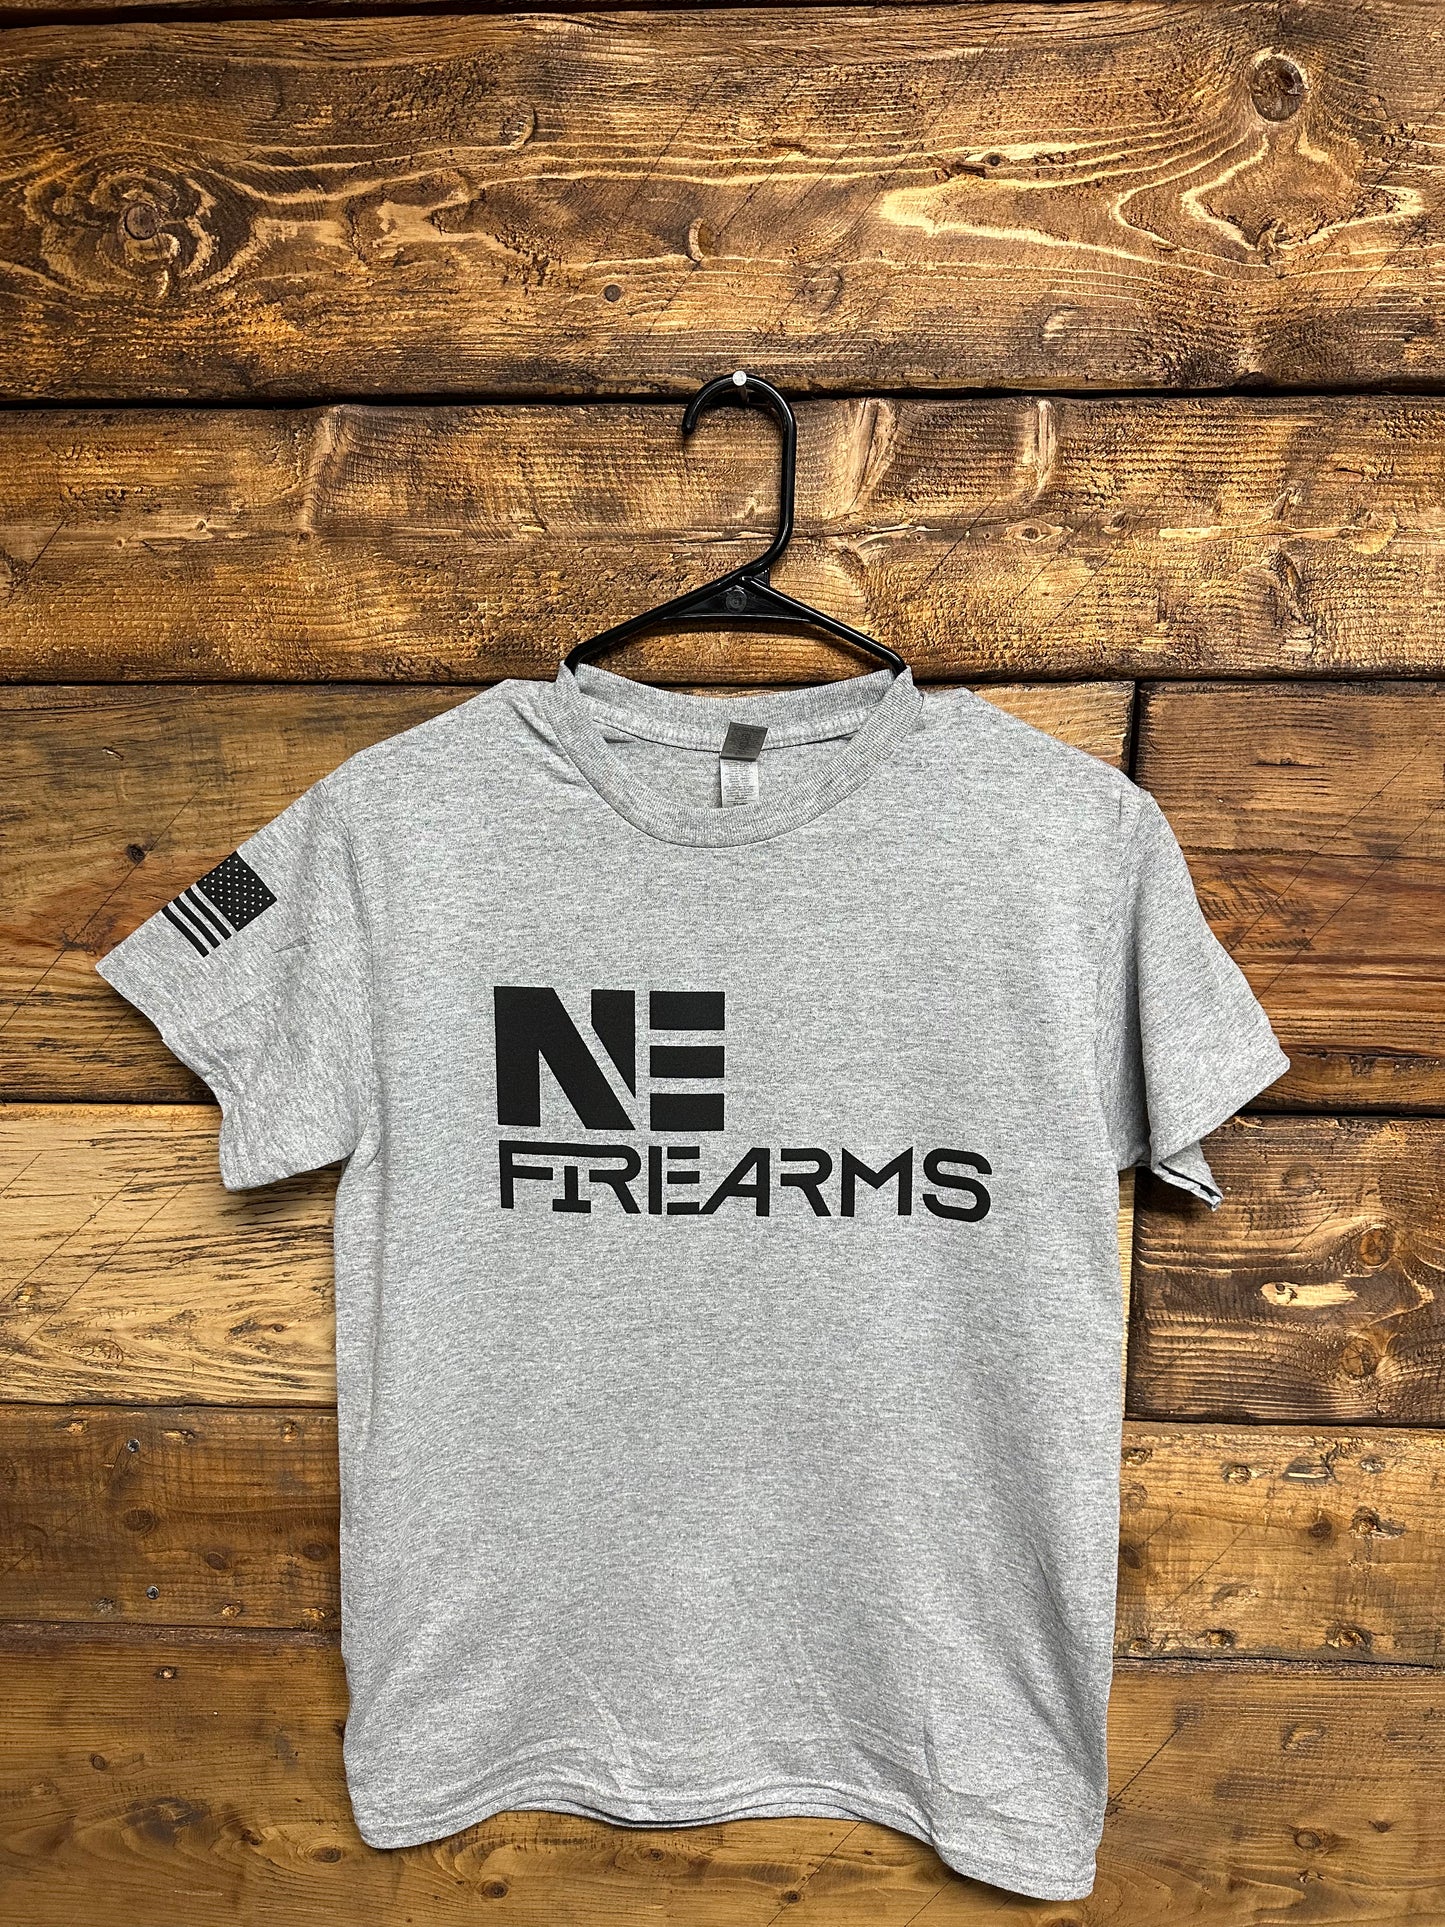 NE Firearms Grey T-Shirt with quote “I would rather die on my feet than live on my knees”